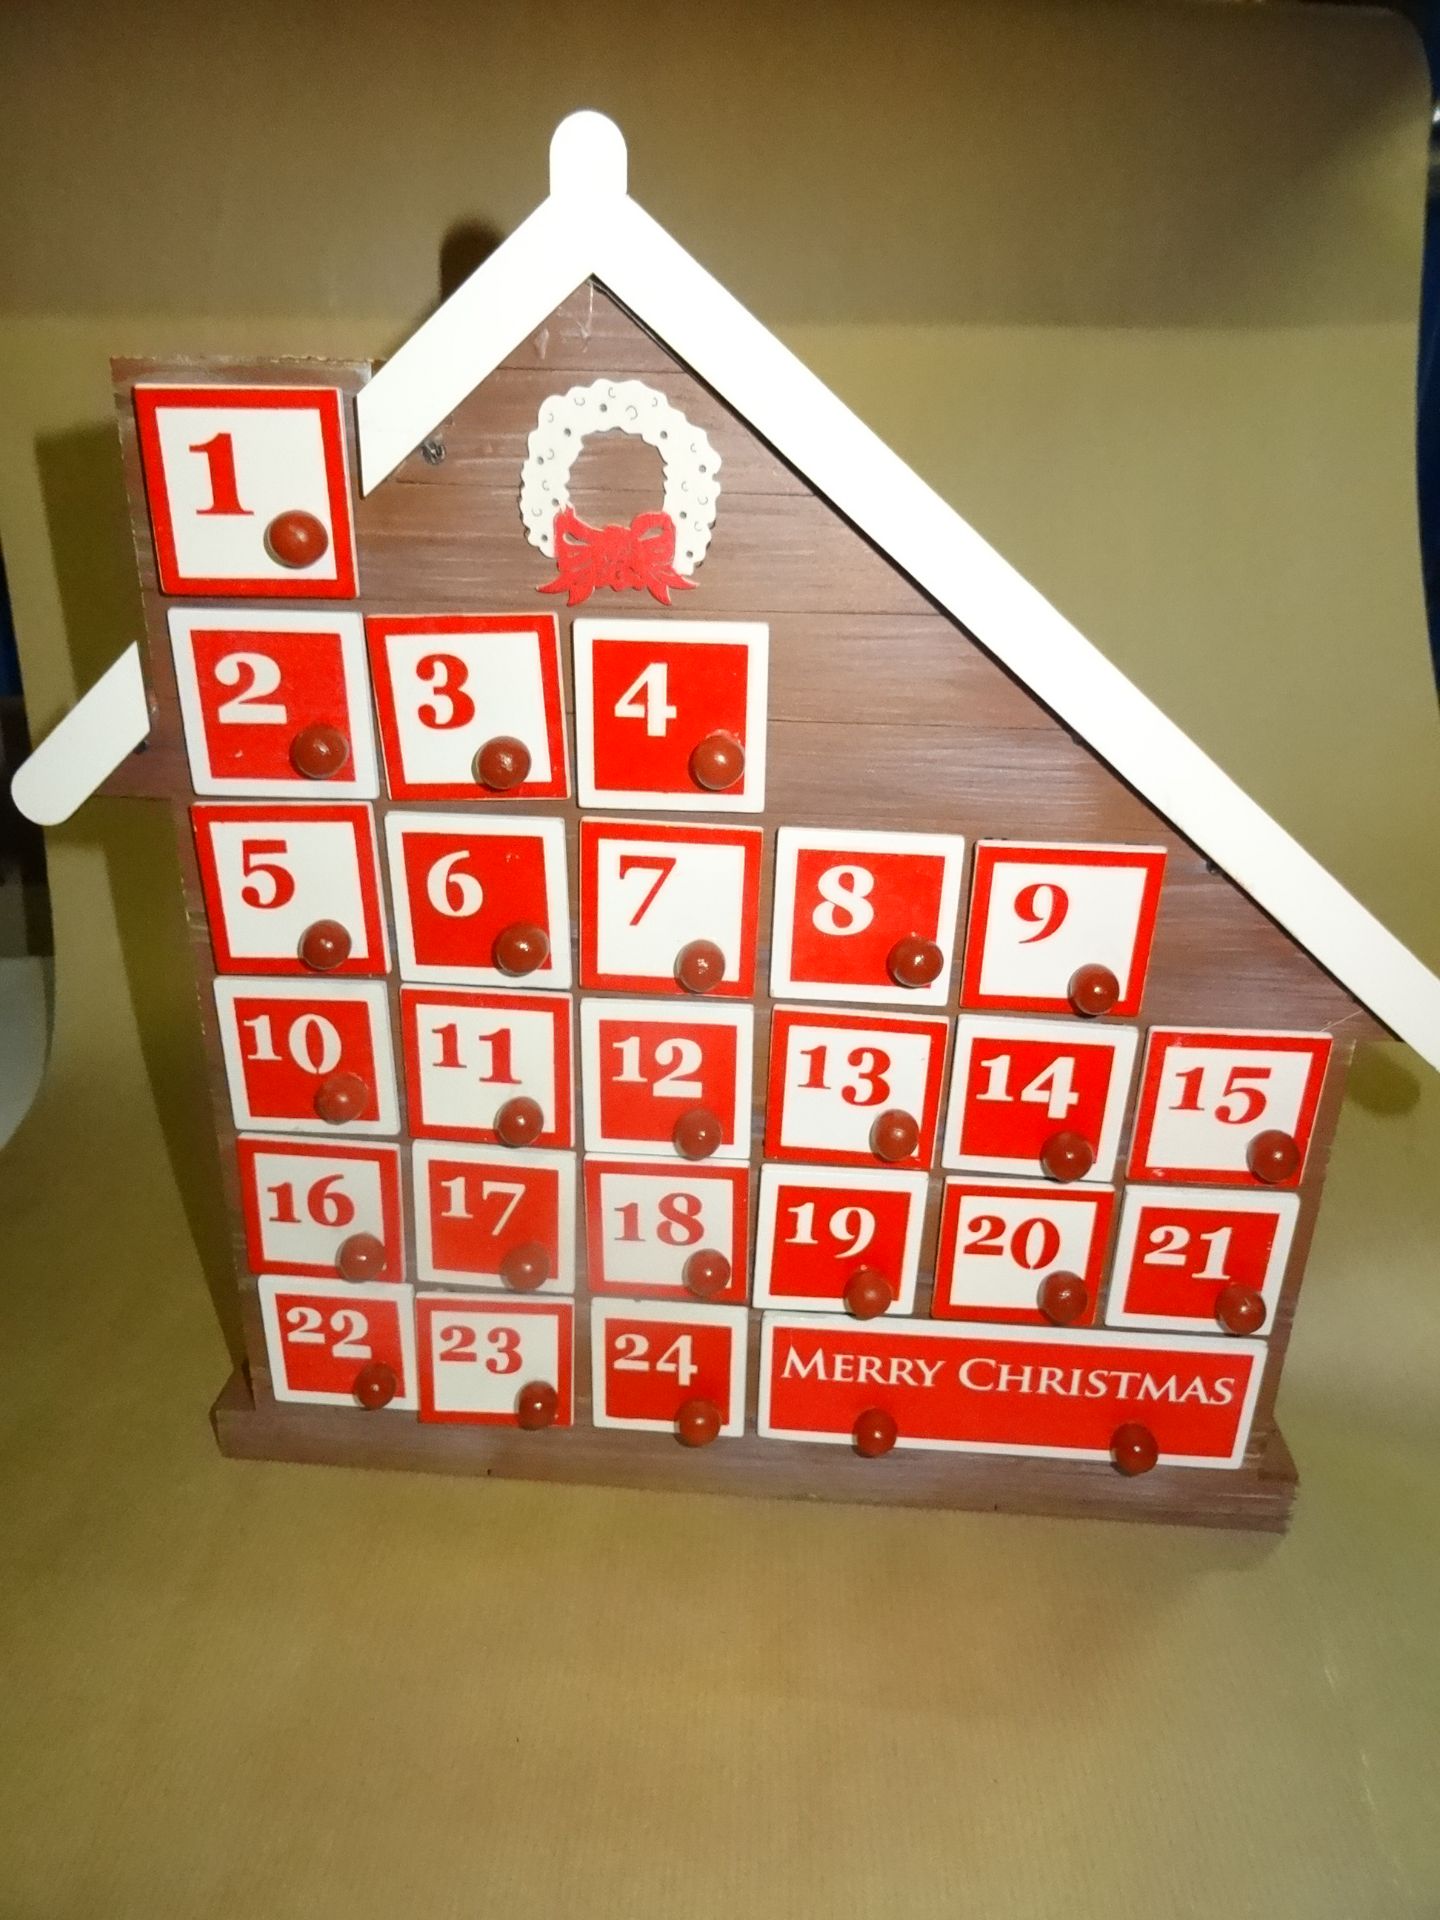 6 x The Christmas Workshop LED Light Up Wooden Advent Calender. Count down the days to christmas - Image 3 of 3